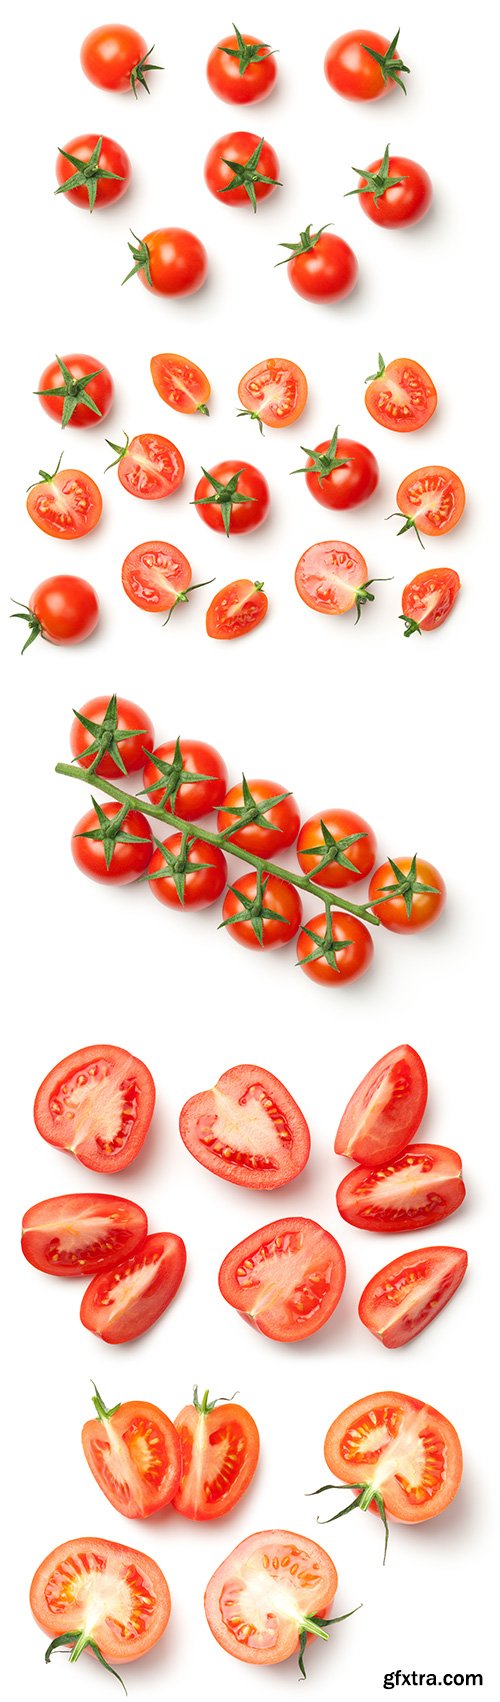 Cherry Tomatoes Isolated - 6xJPGs